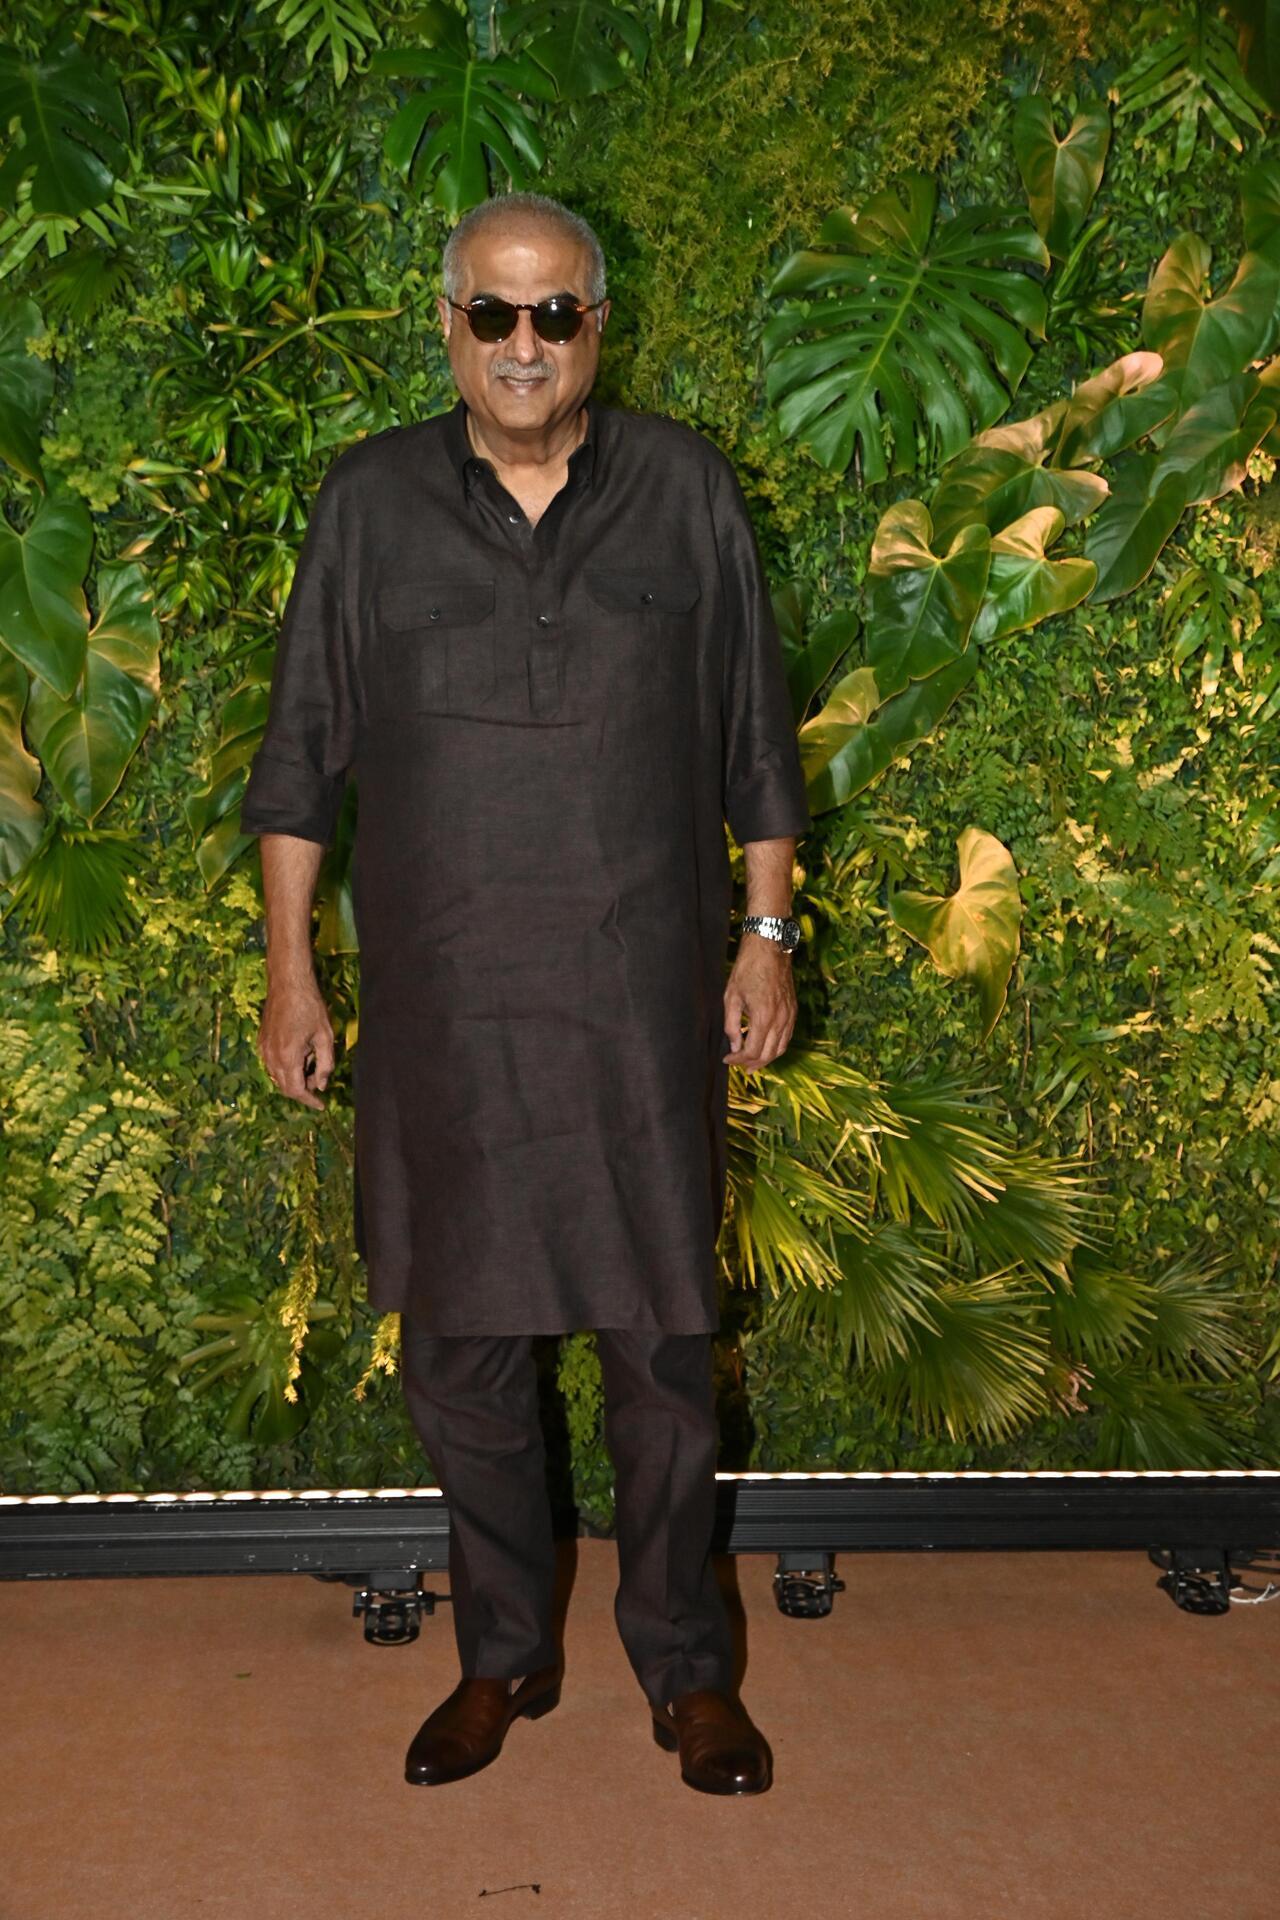 Boney Kapoor looks smart in a kurta and add a touch of glamour with those goggles